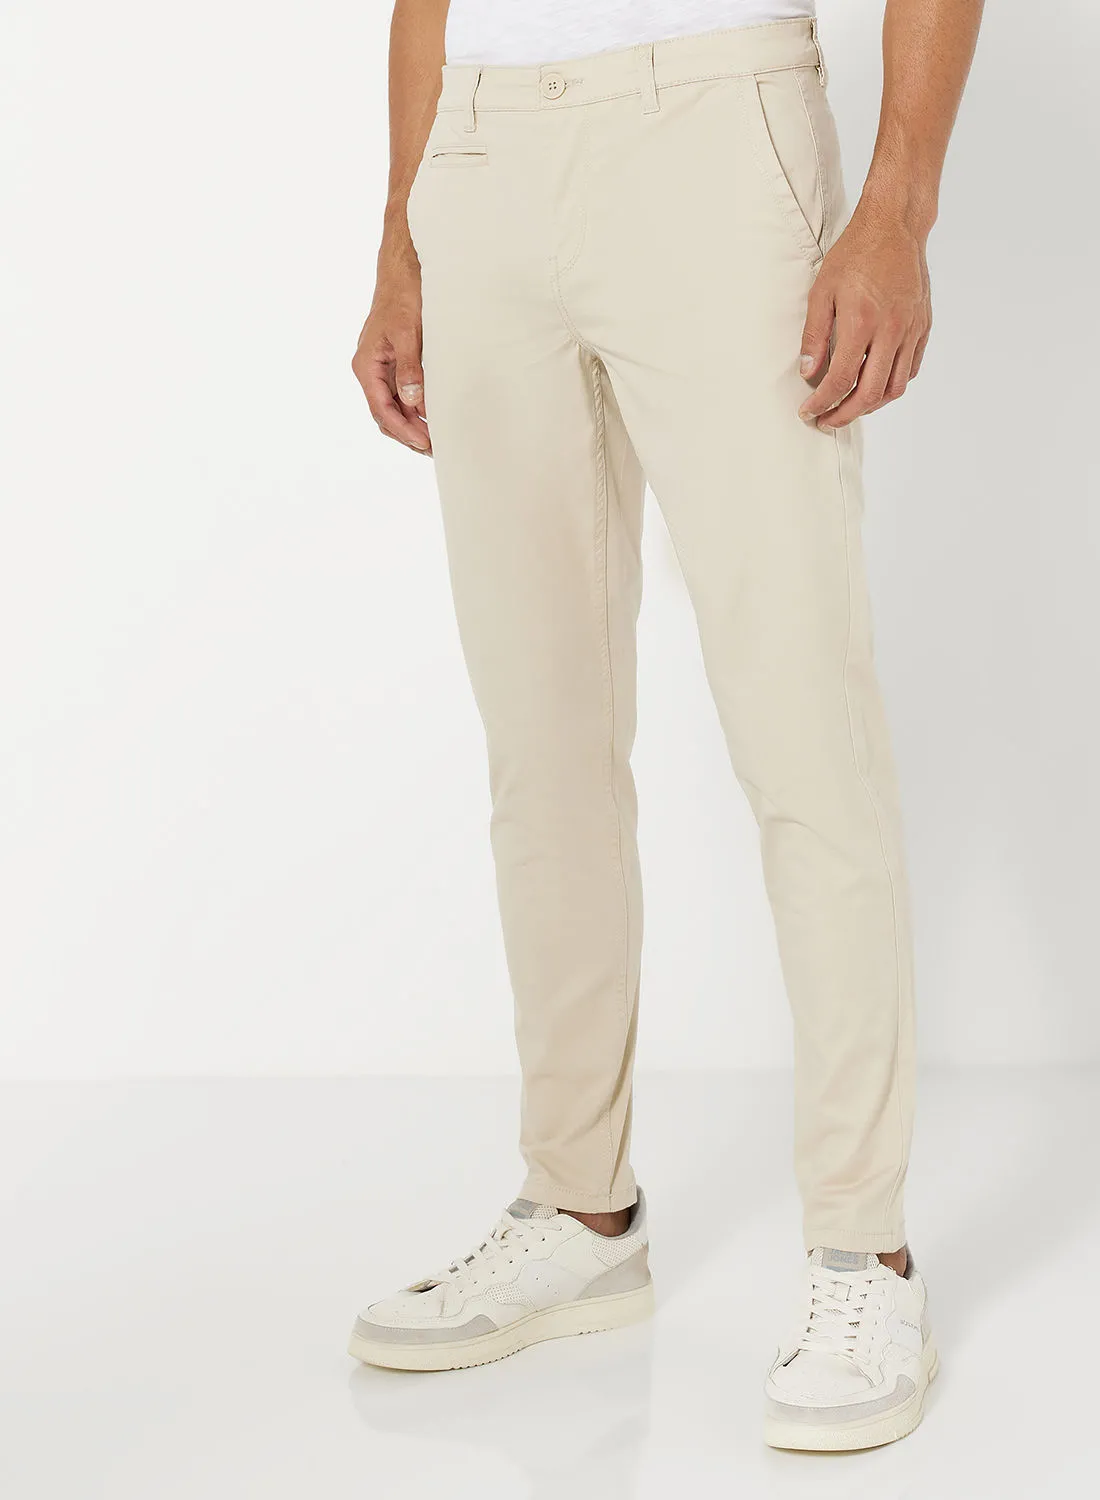 Noon East Solid Pattern Stretch Slim Fit Pants Ivory